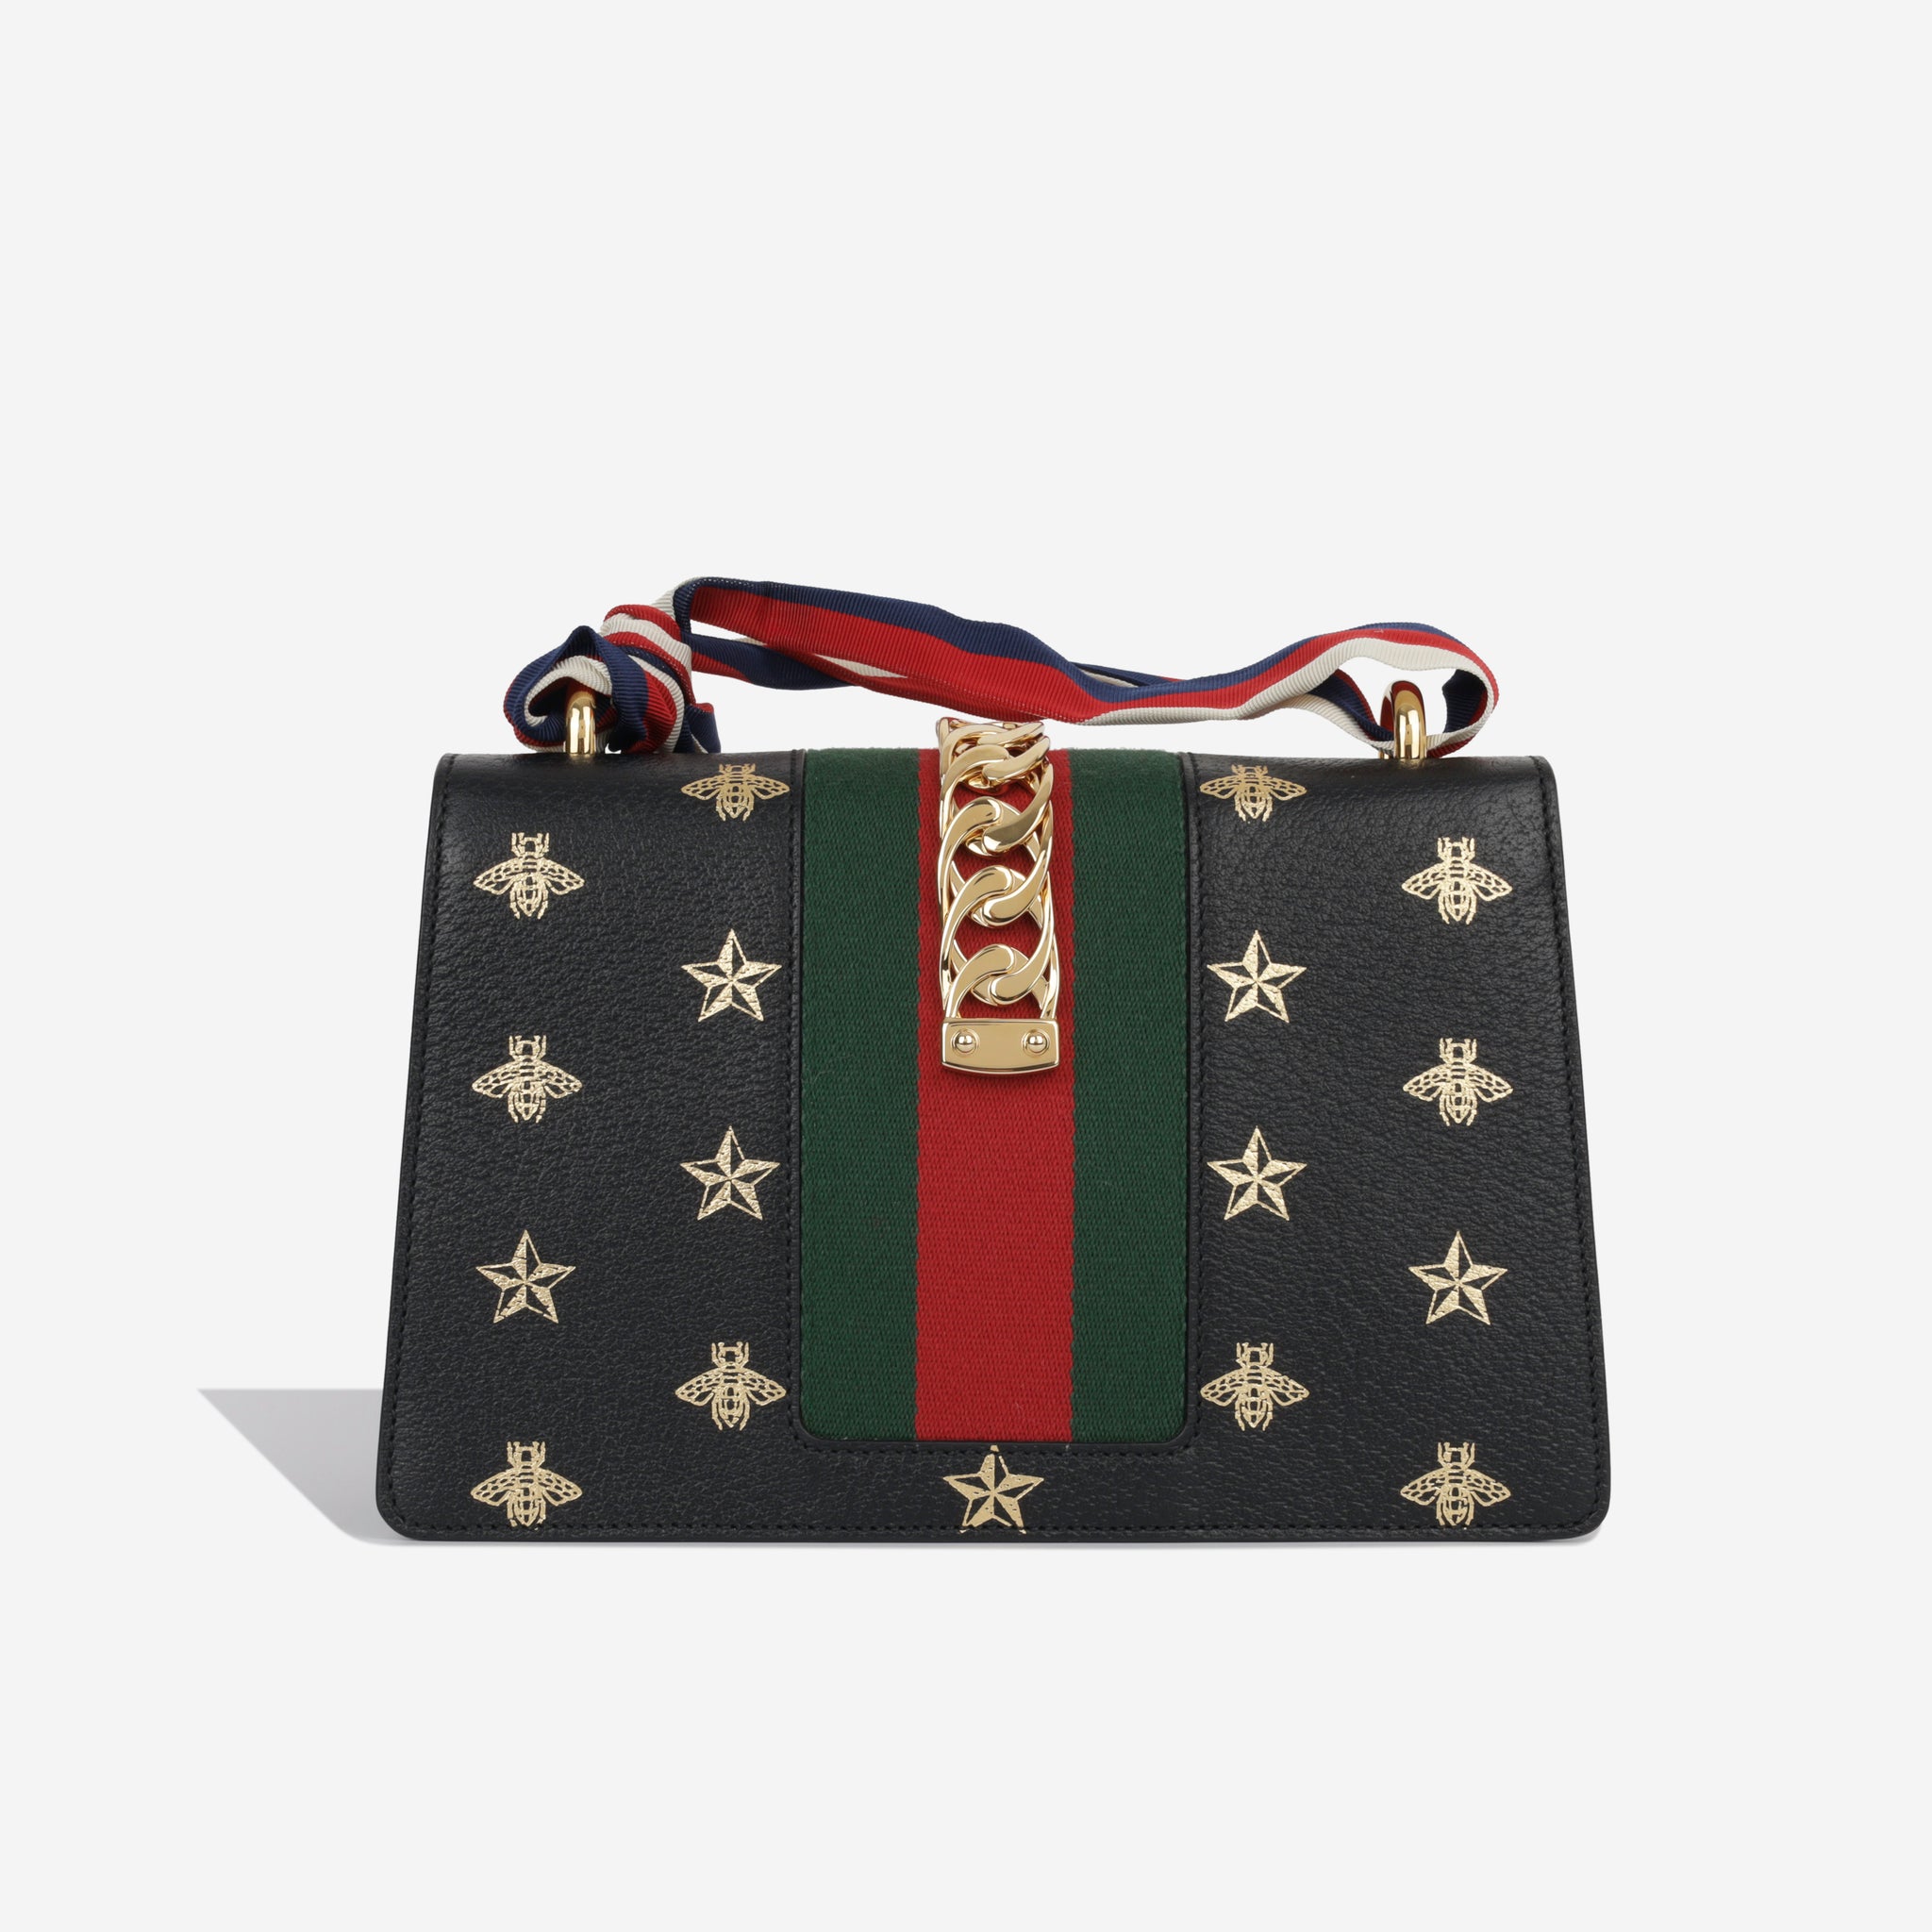 Stylish Bee-Themed Gucci Bag, by WomenBags.co.uk